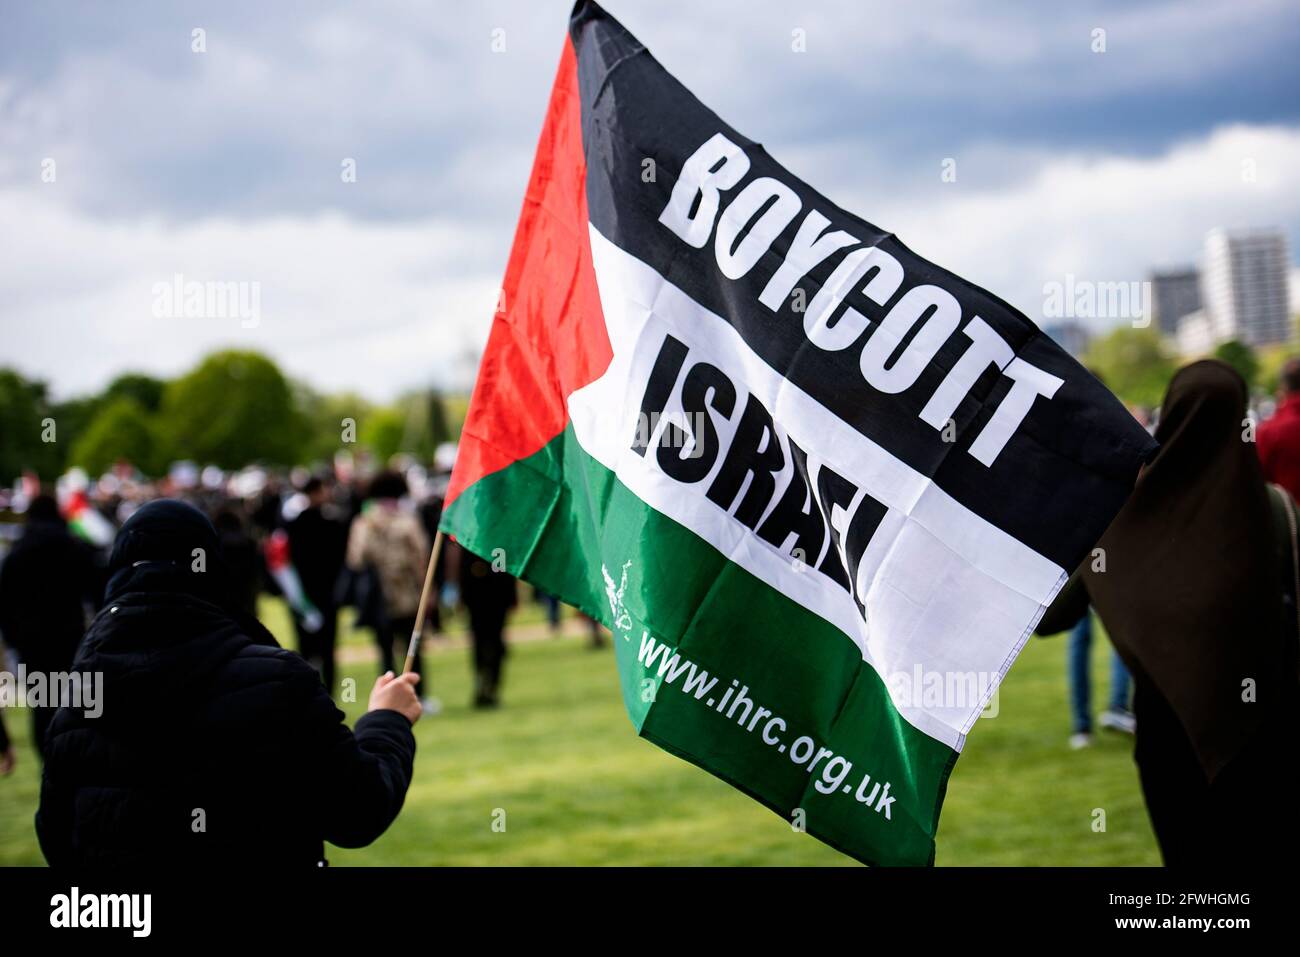 A protester holds a Palestinian flag during the demonstration.Palestinian Citizens are being subject to violent armed mobs, attempting to drive them from their homes. The violence is part of Israel's regime of institutionalised racist discrimination against the Palestinian people, amounting to the crime of apartheid. The UK Government is expected to take action, which includes implementing sanctions, military embargo to cut the supply of deadly weapons to Israel, and banning the import of goods from Israel's illegal settlements. Stock Photo